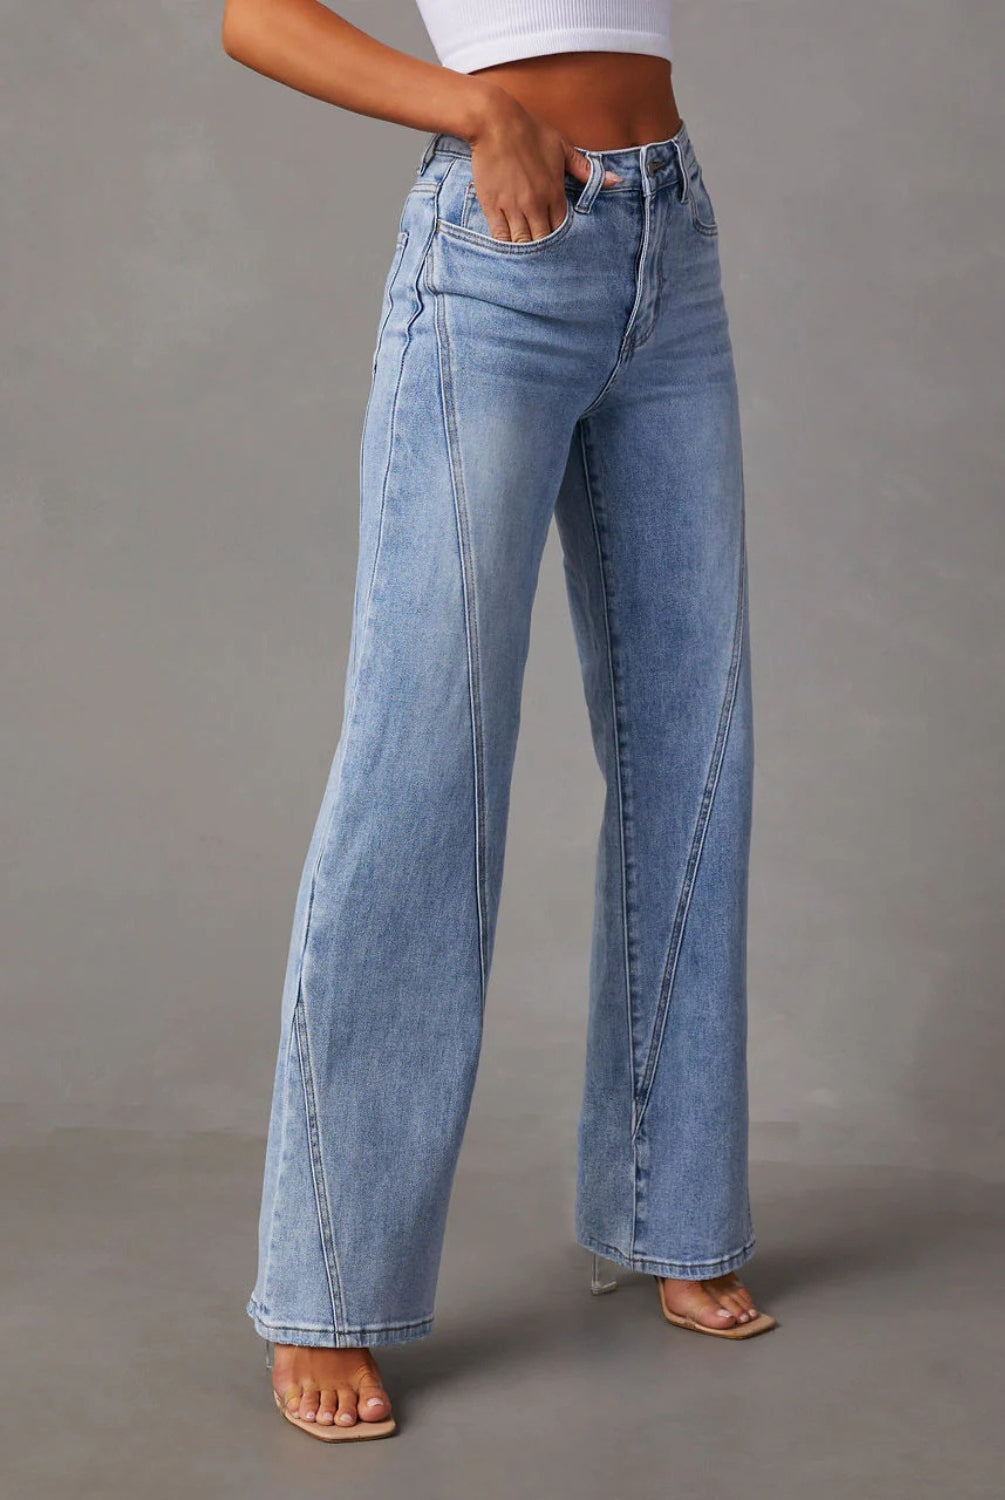 A model showcases Classic High-Waist Straight-Leg Jeans in a light blue wash, complementing the look with a cropped white top and minimalist open-toe heels for an understated yet chic appearance.